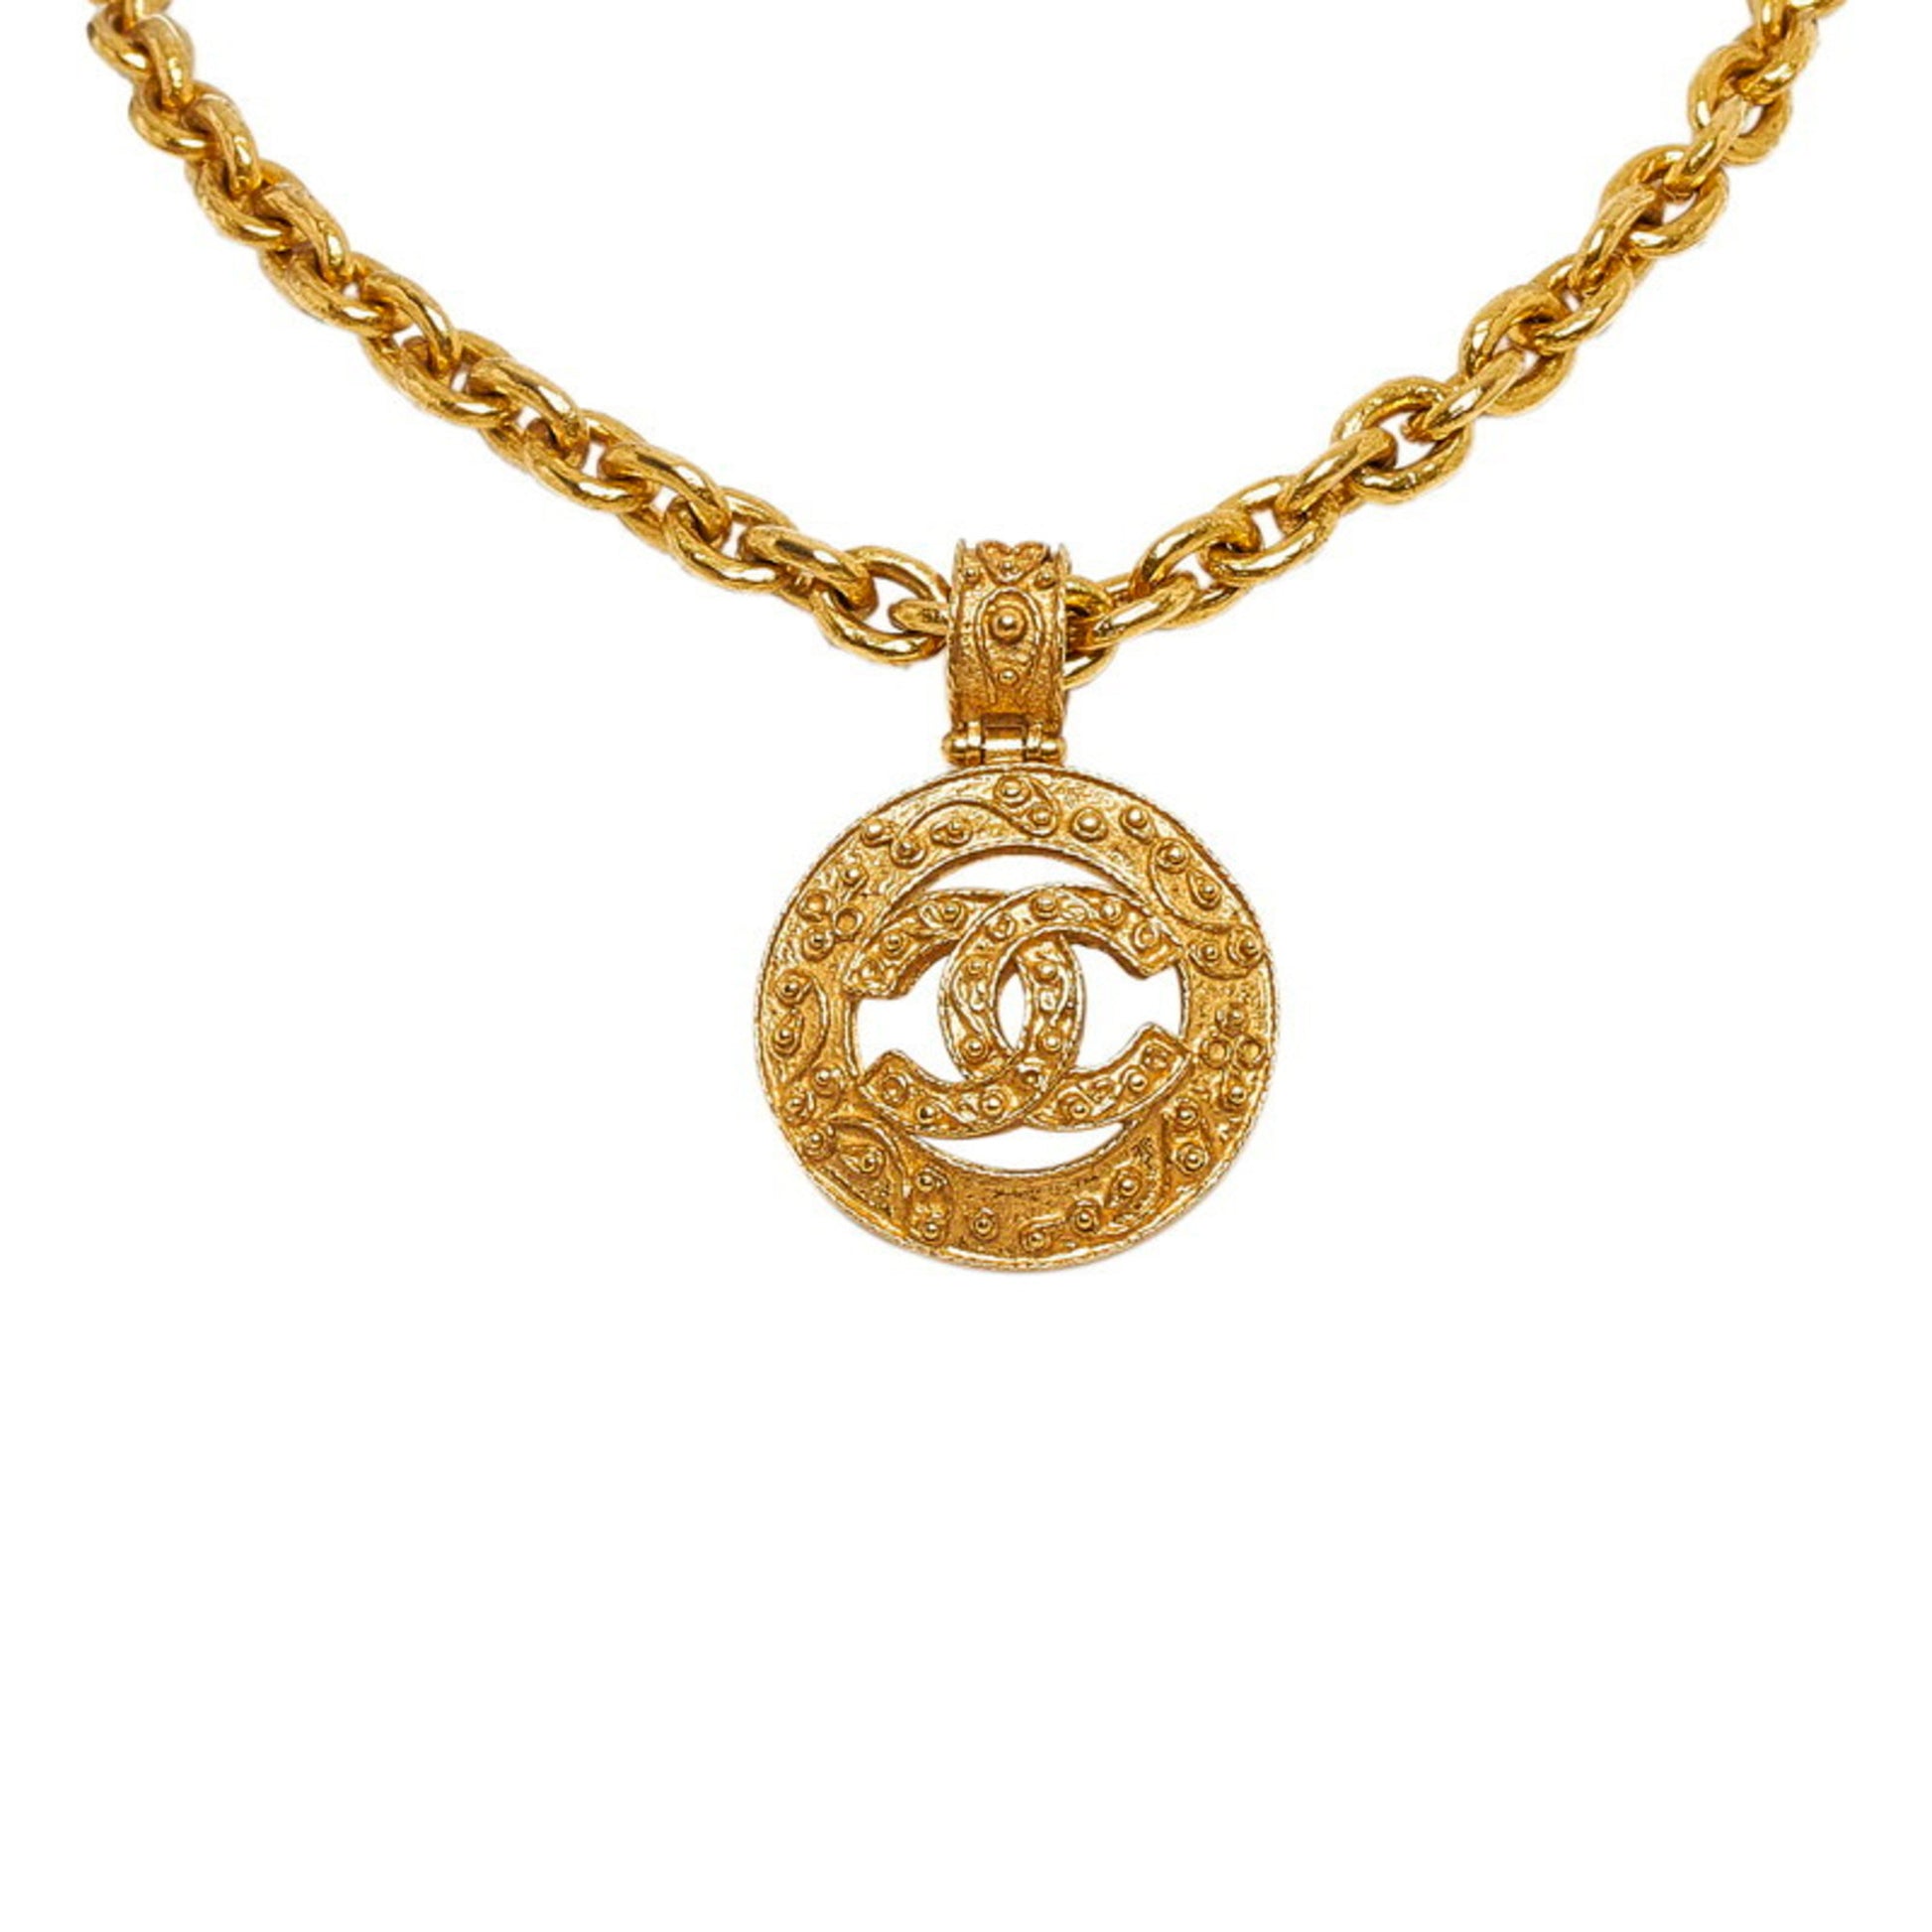 Susan Caplan Vintage Chanel Gold Plated Round Pendant Necklace, Gold